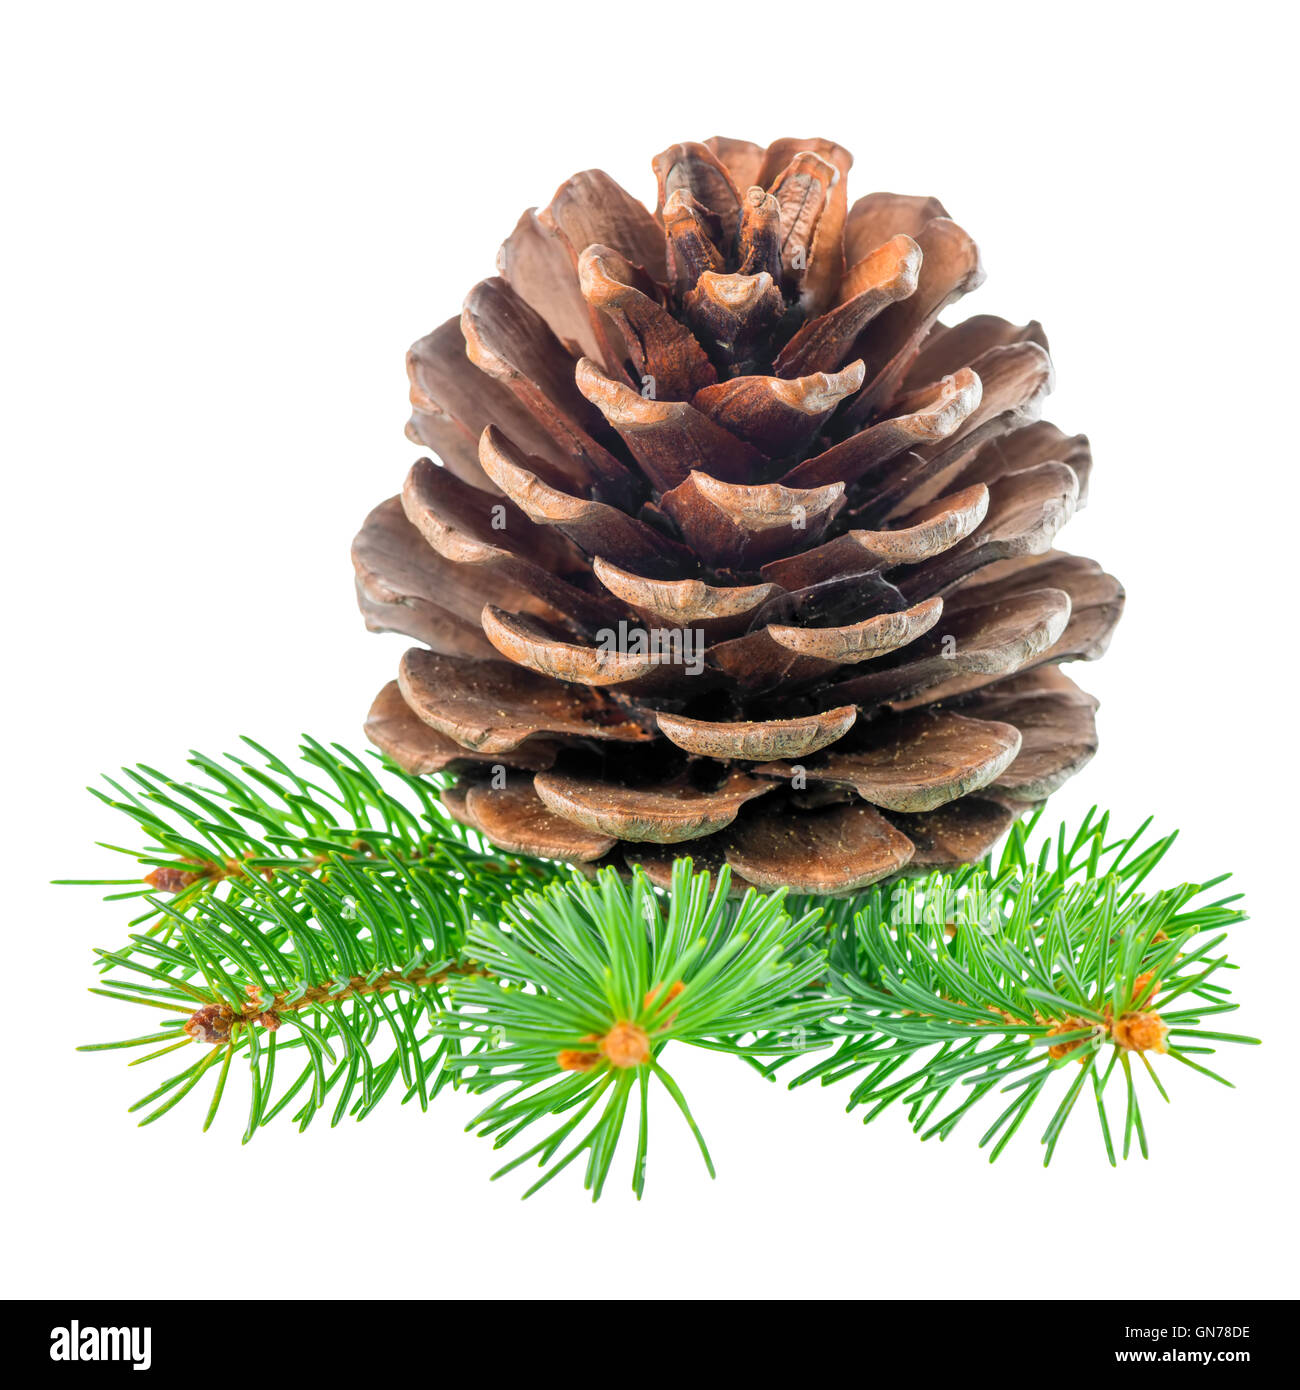 beautiful cedar pine cone and needles is isolated on white background Stock Photo